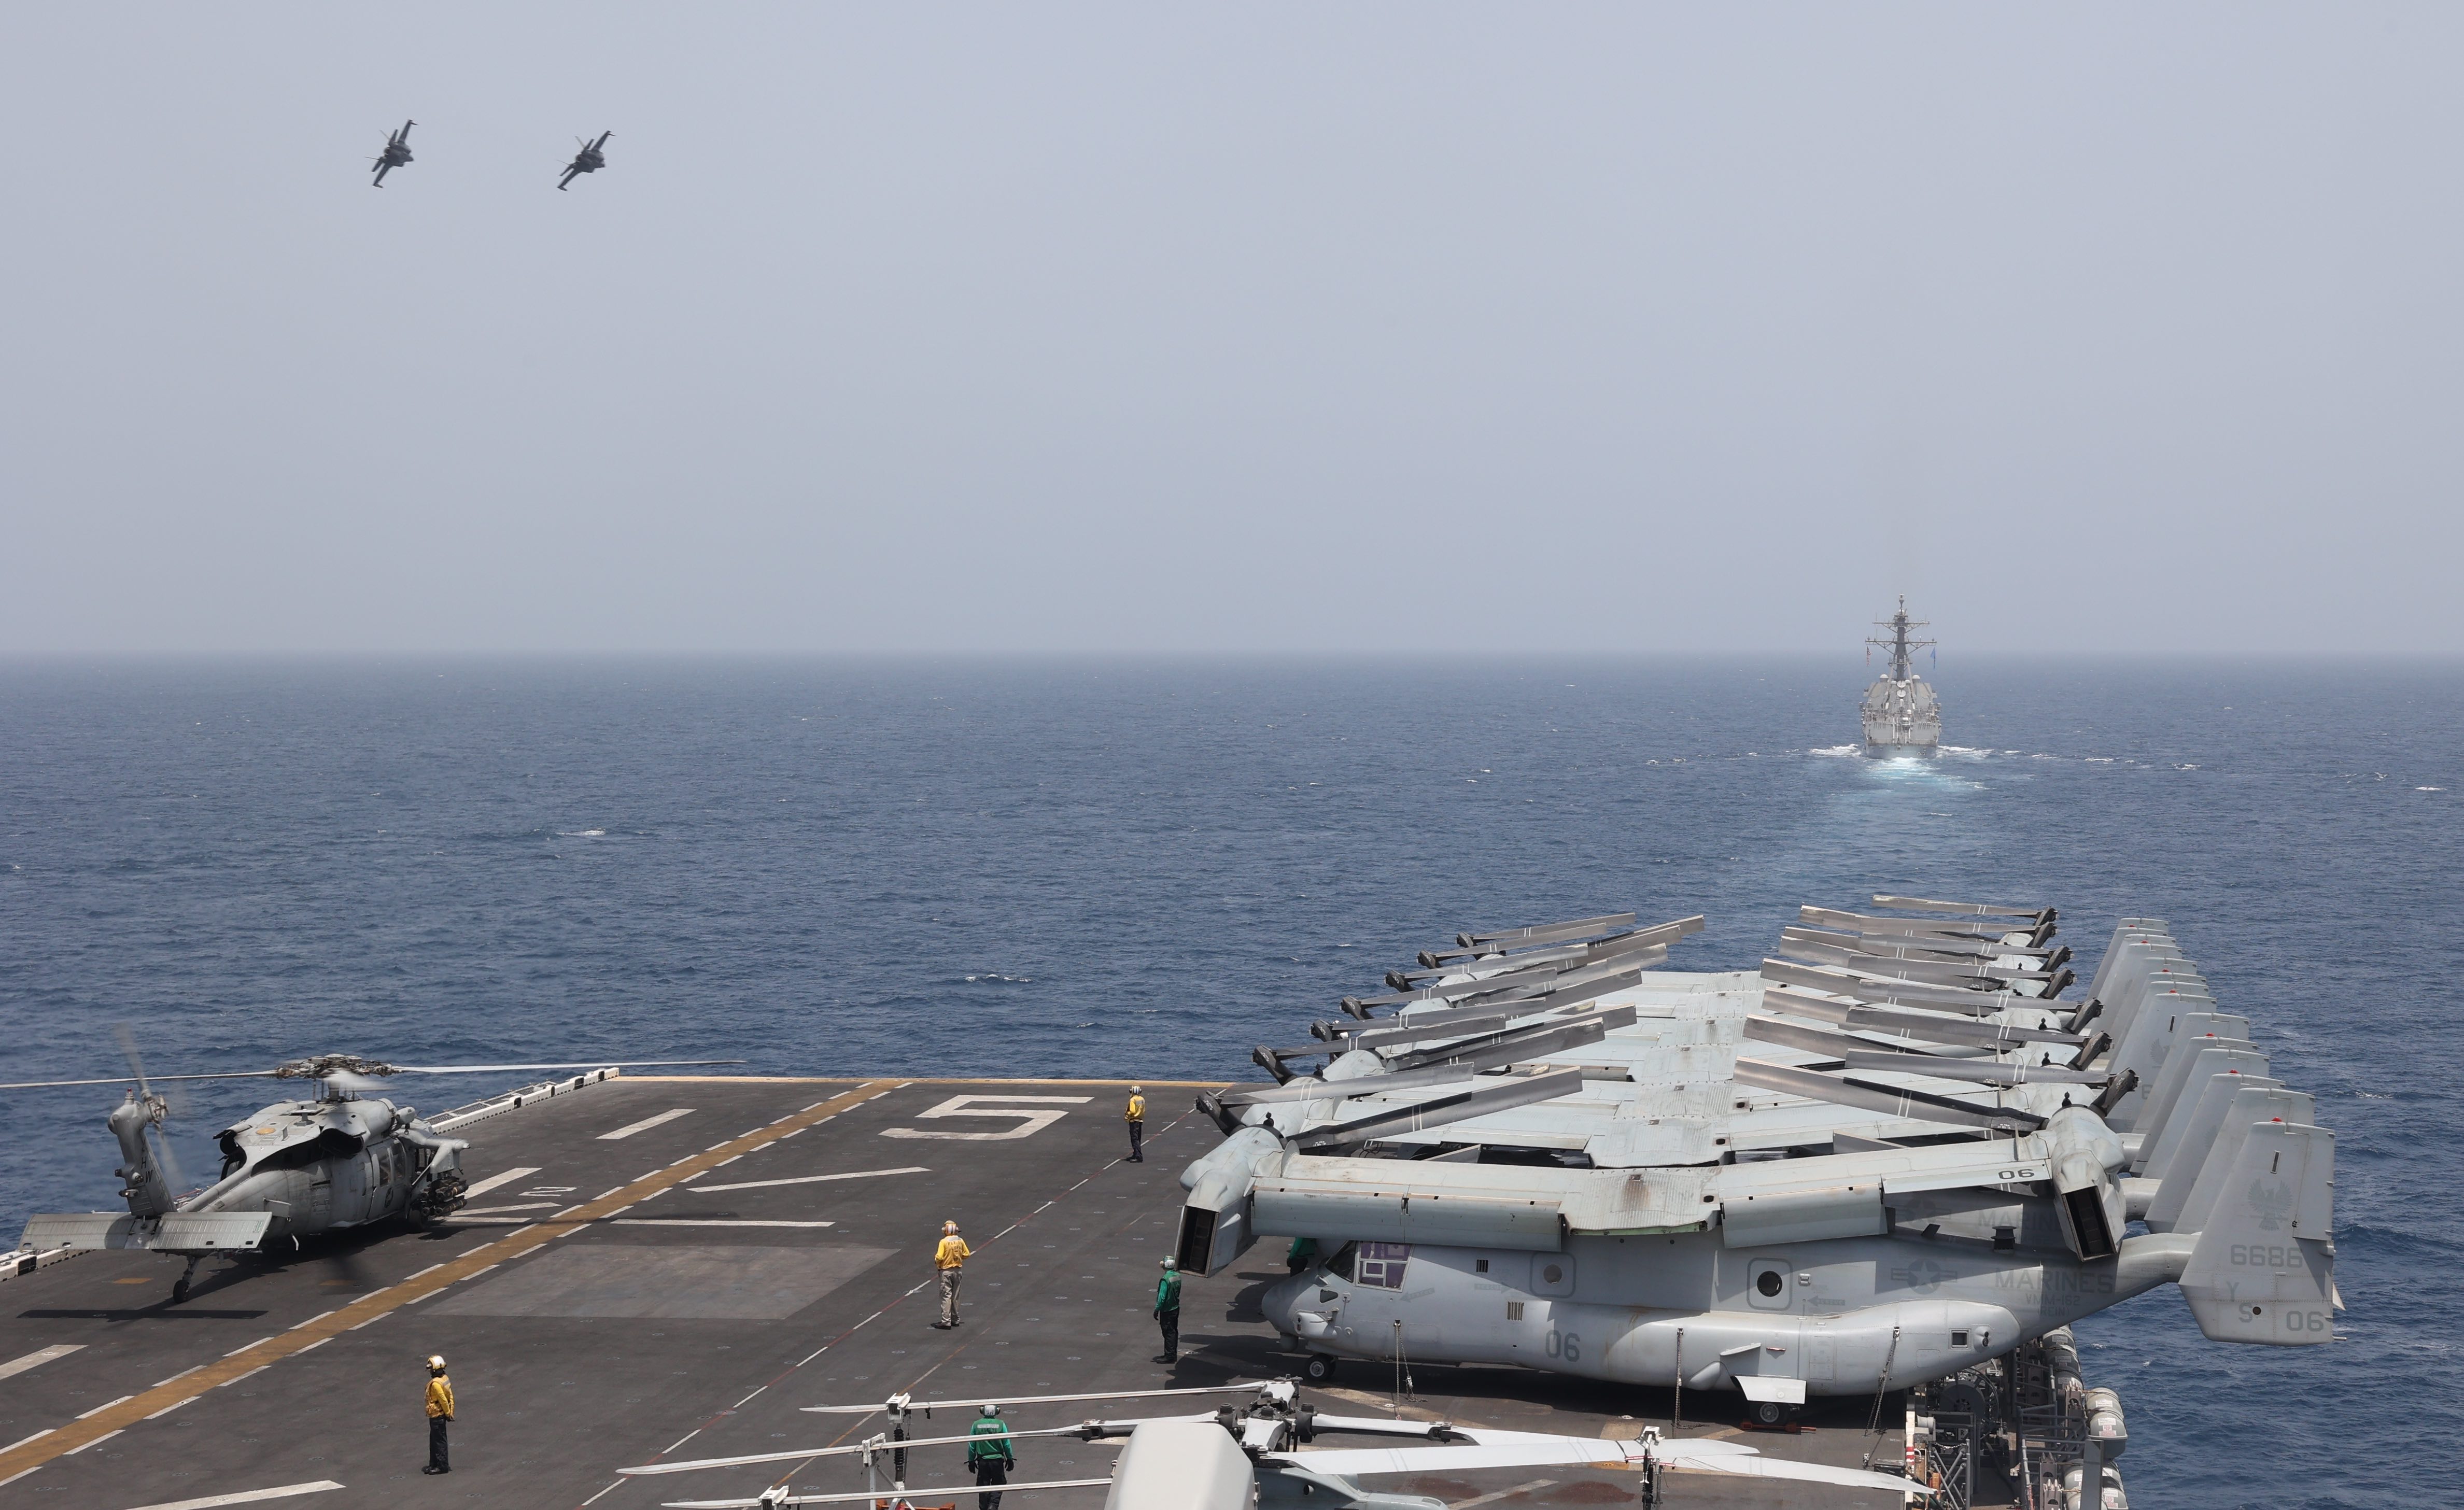 Uss Bataan Uss Carter Hall And 26th Meu Now In The Persian Gulf Usni News 